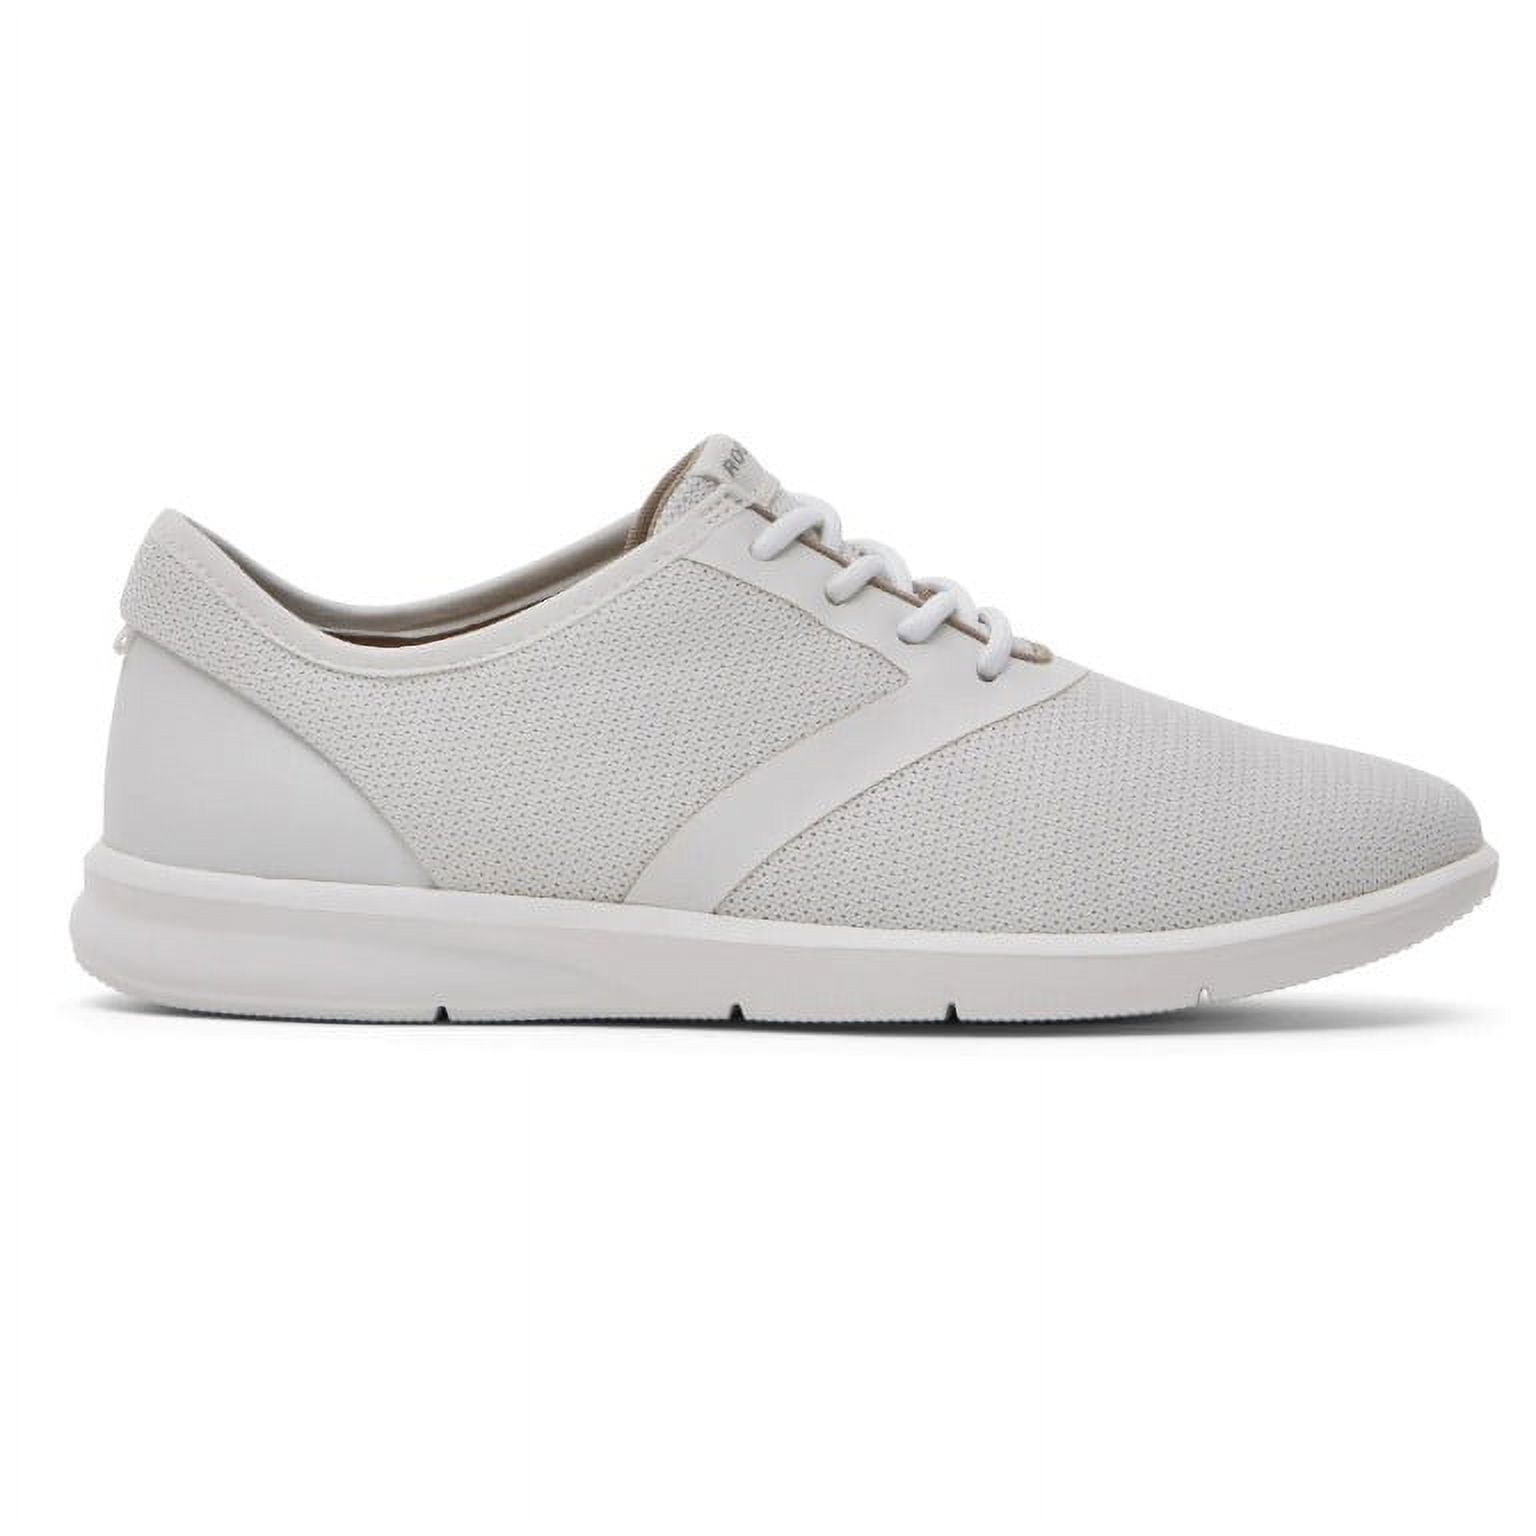 Buy Bersache Men White Casual Sneakers Shoes at Amazon.in